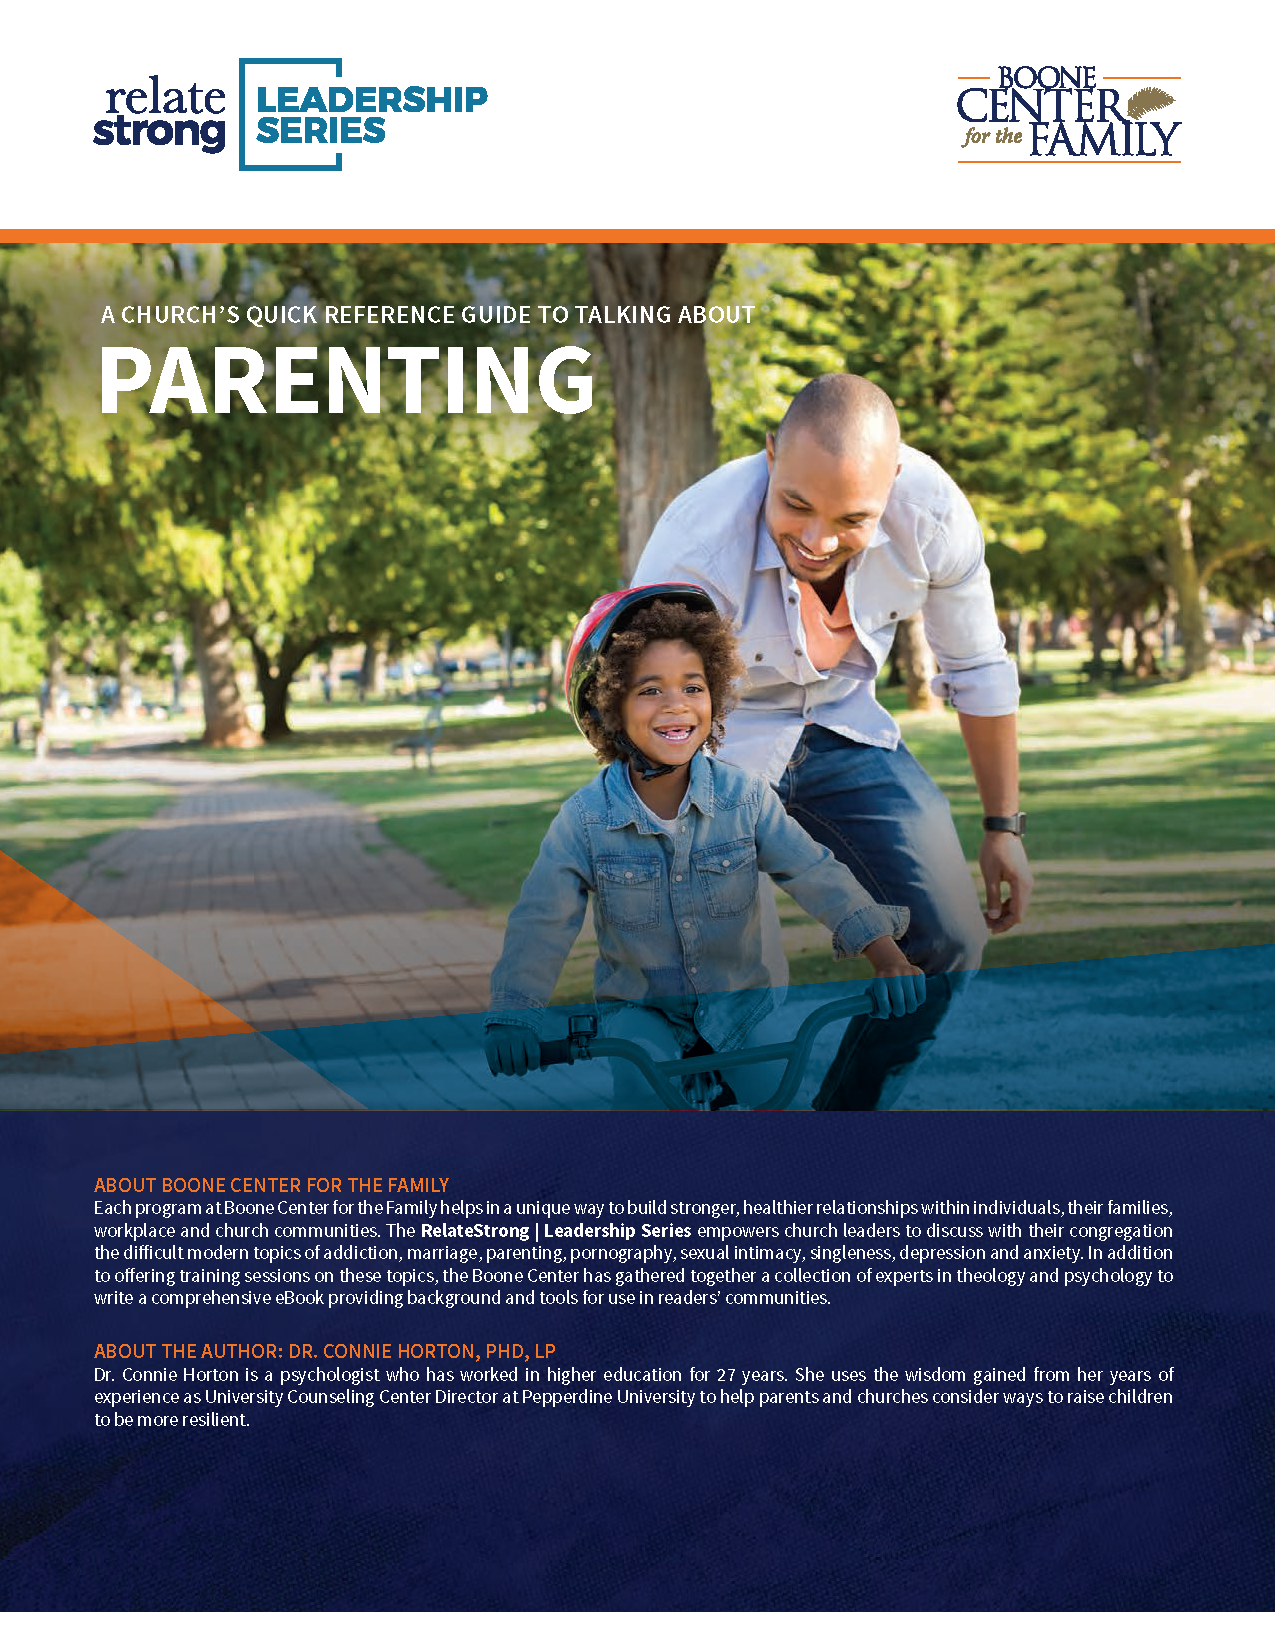 QUICK REFERENCE GUIDE - Talking about Parenting